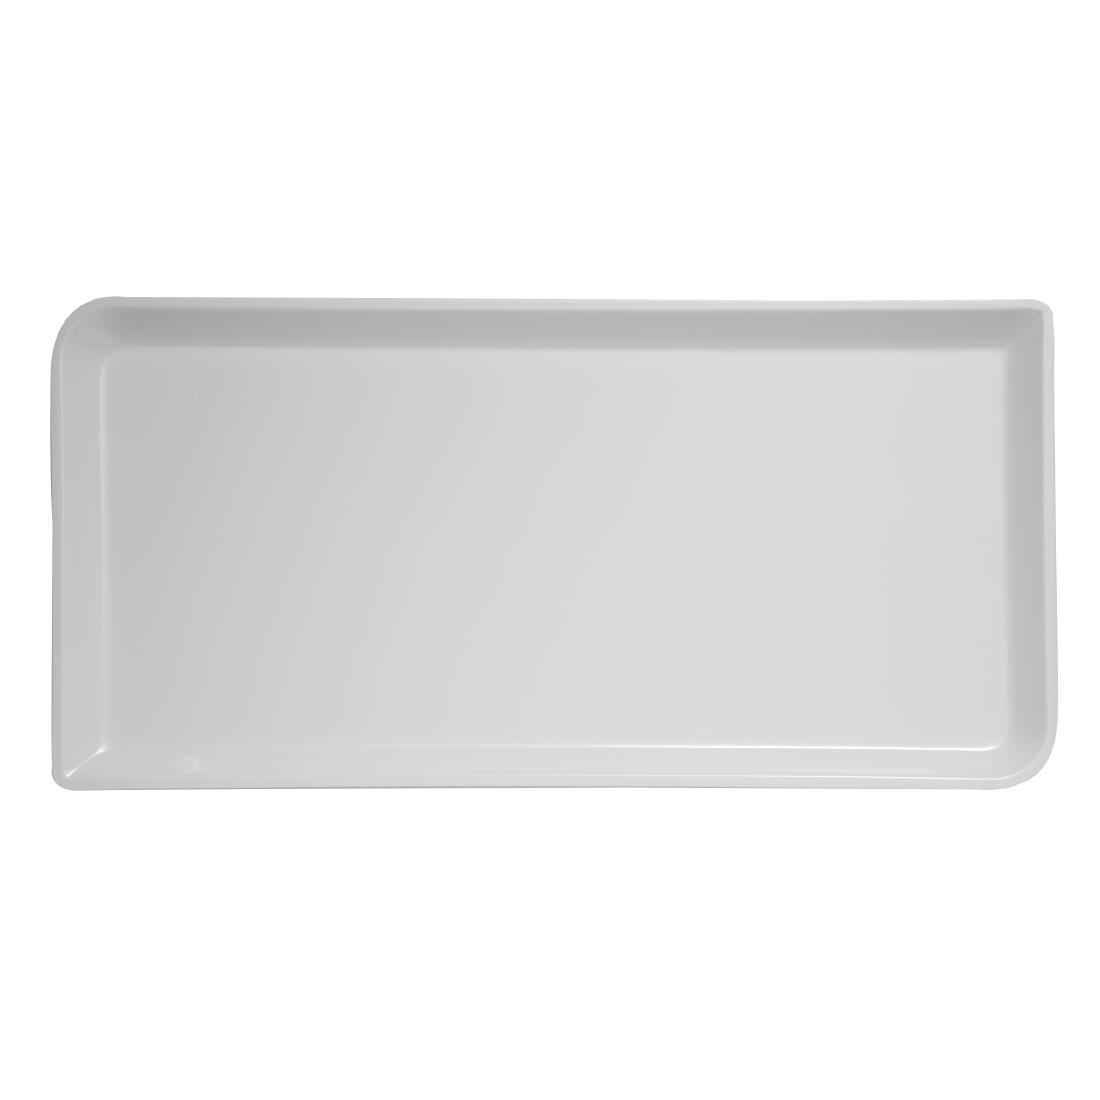 APS White Counter System 440 x 220 x 20mm - GH431  - 1